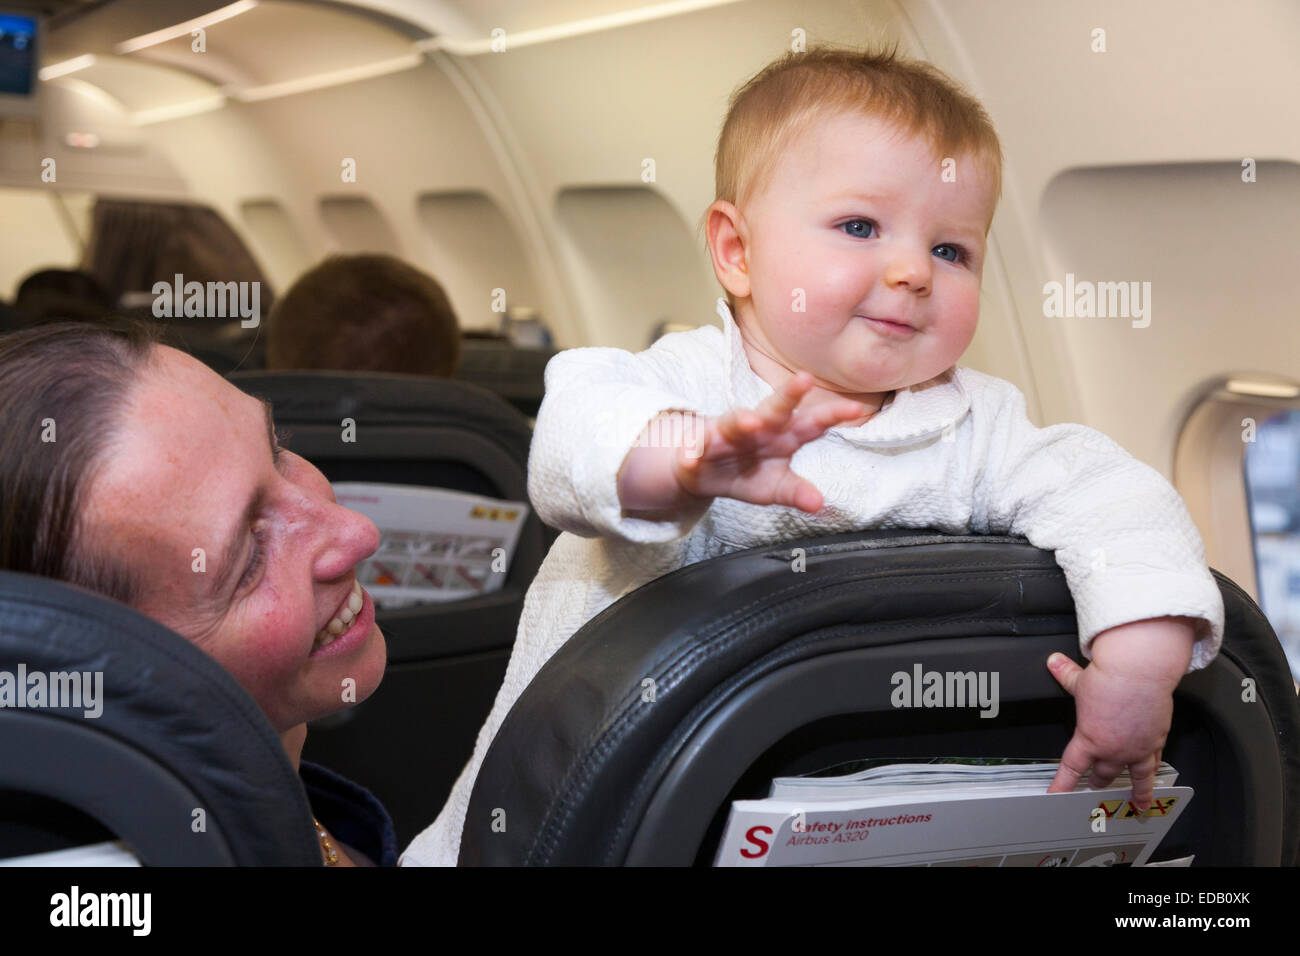 Passenger / mum / mother going on holiday / vacation with her baby travelling on an air plane / airplane / aeroplane / flight. Stock Photo